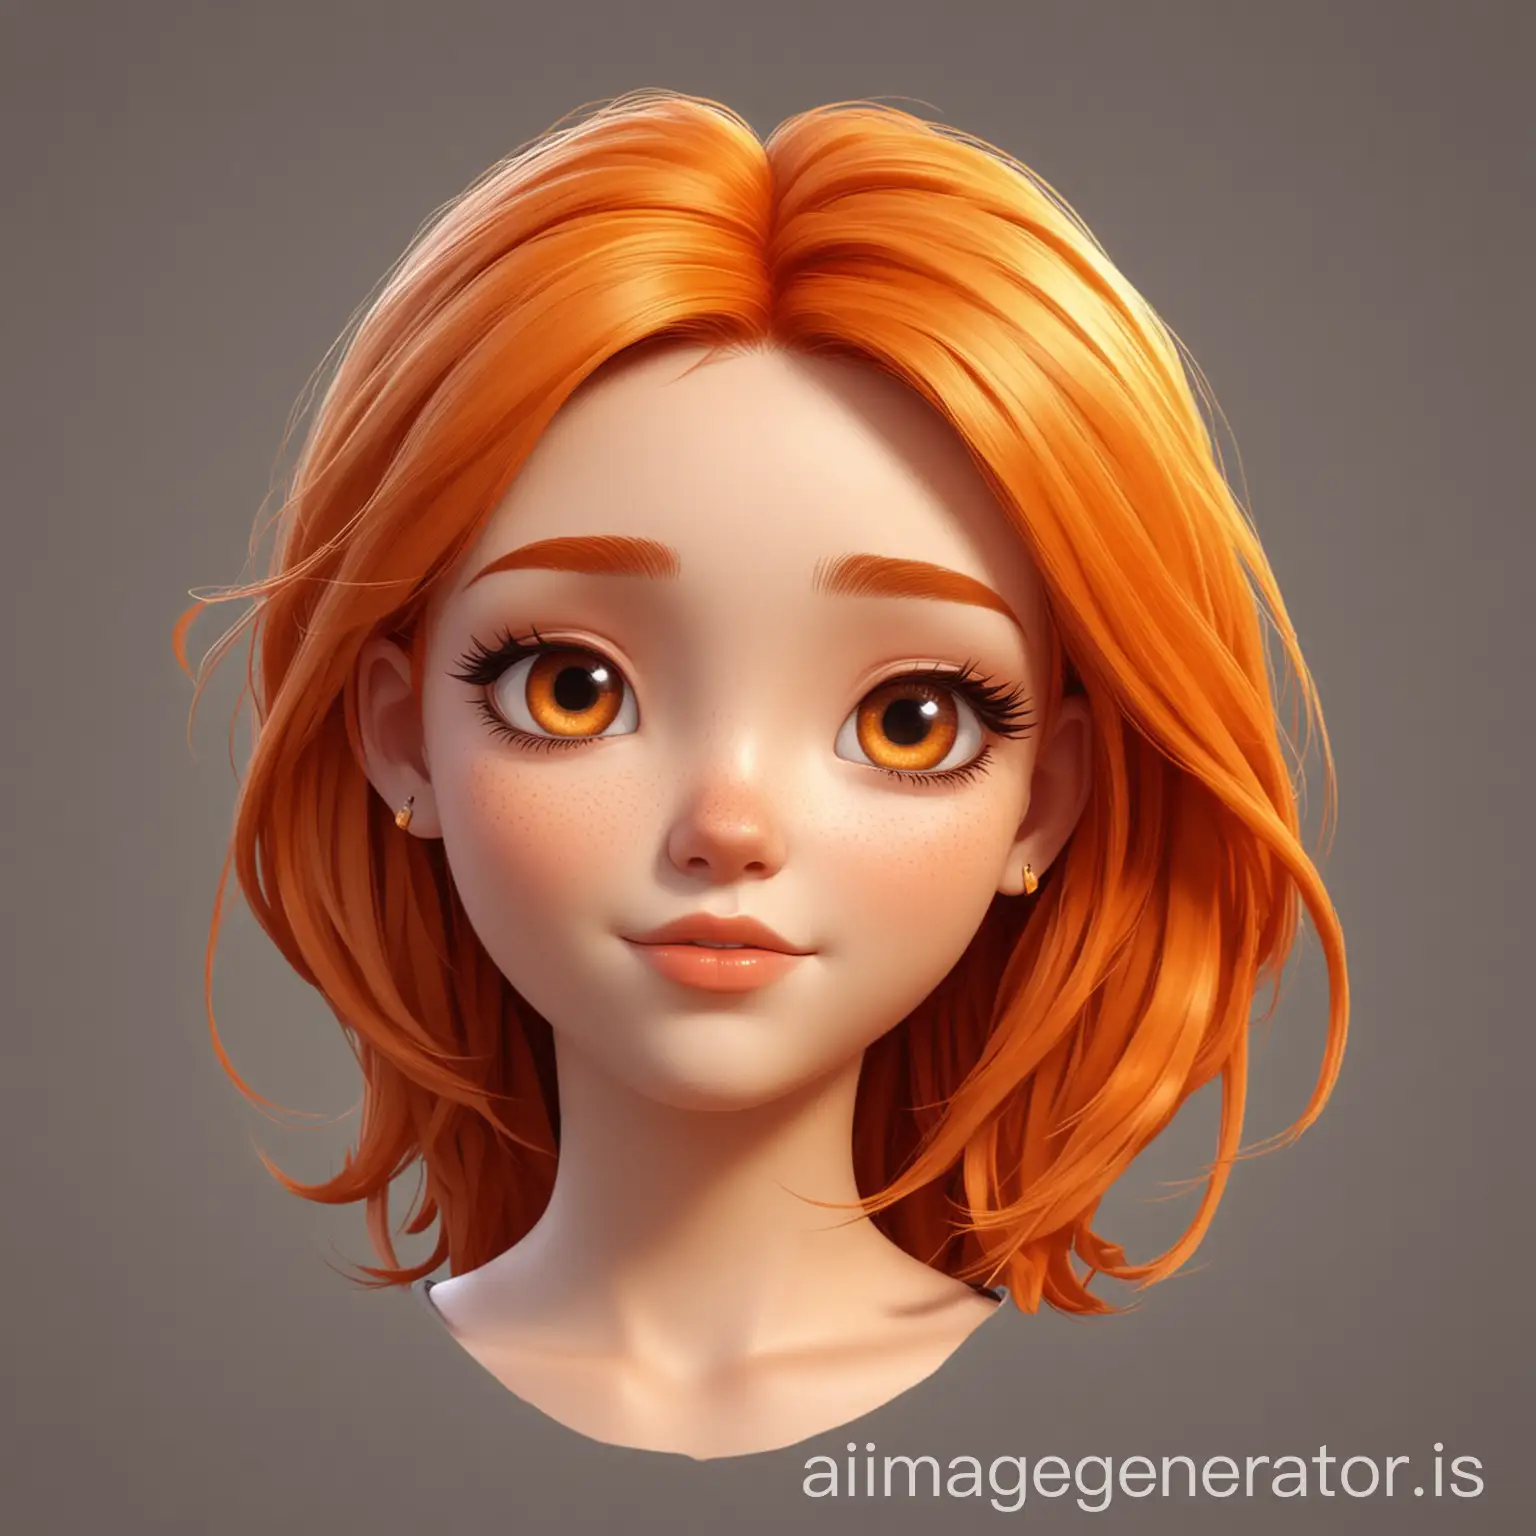 Orange hair girl avatar cartoon ,crescent right and top side at background